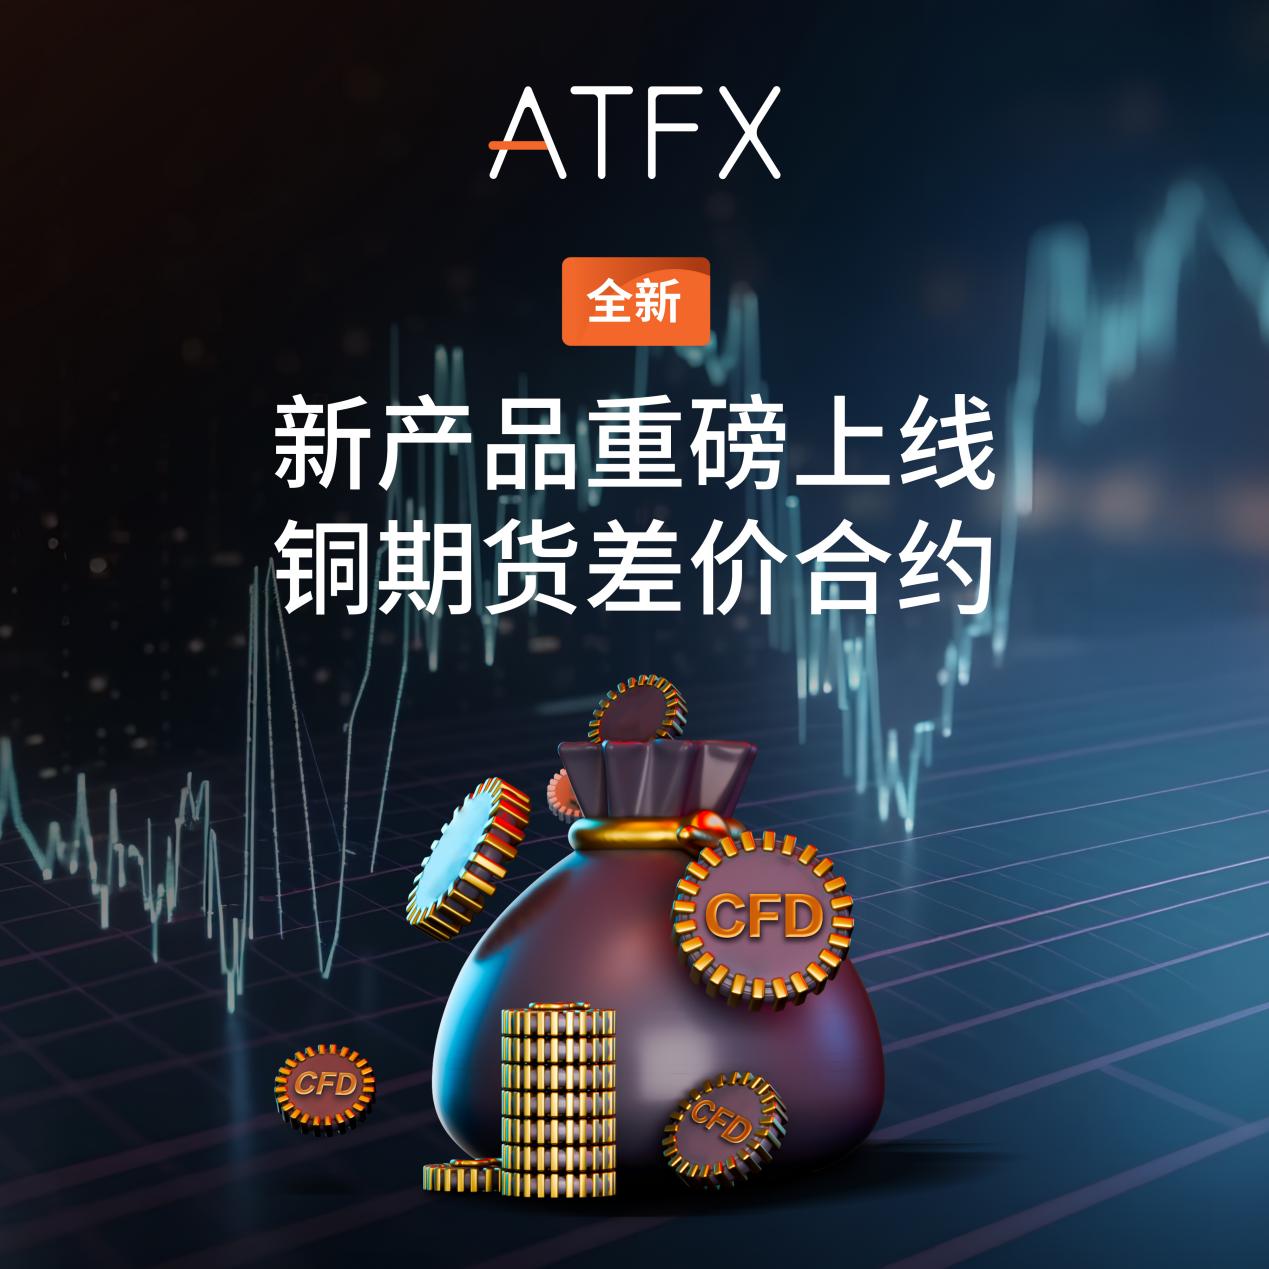 Focusing on diversified investment needs,ATFXThe new copper futures contract for price difference was stunningly launched929 / author:atfx2019 / PostsID:1726268